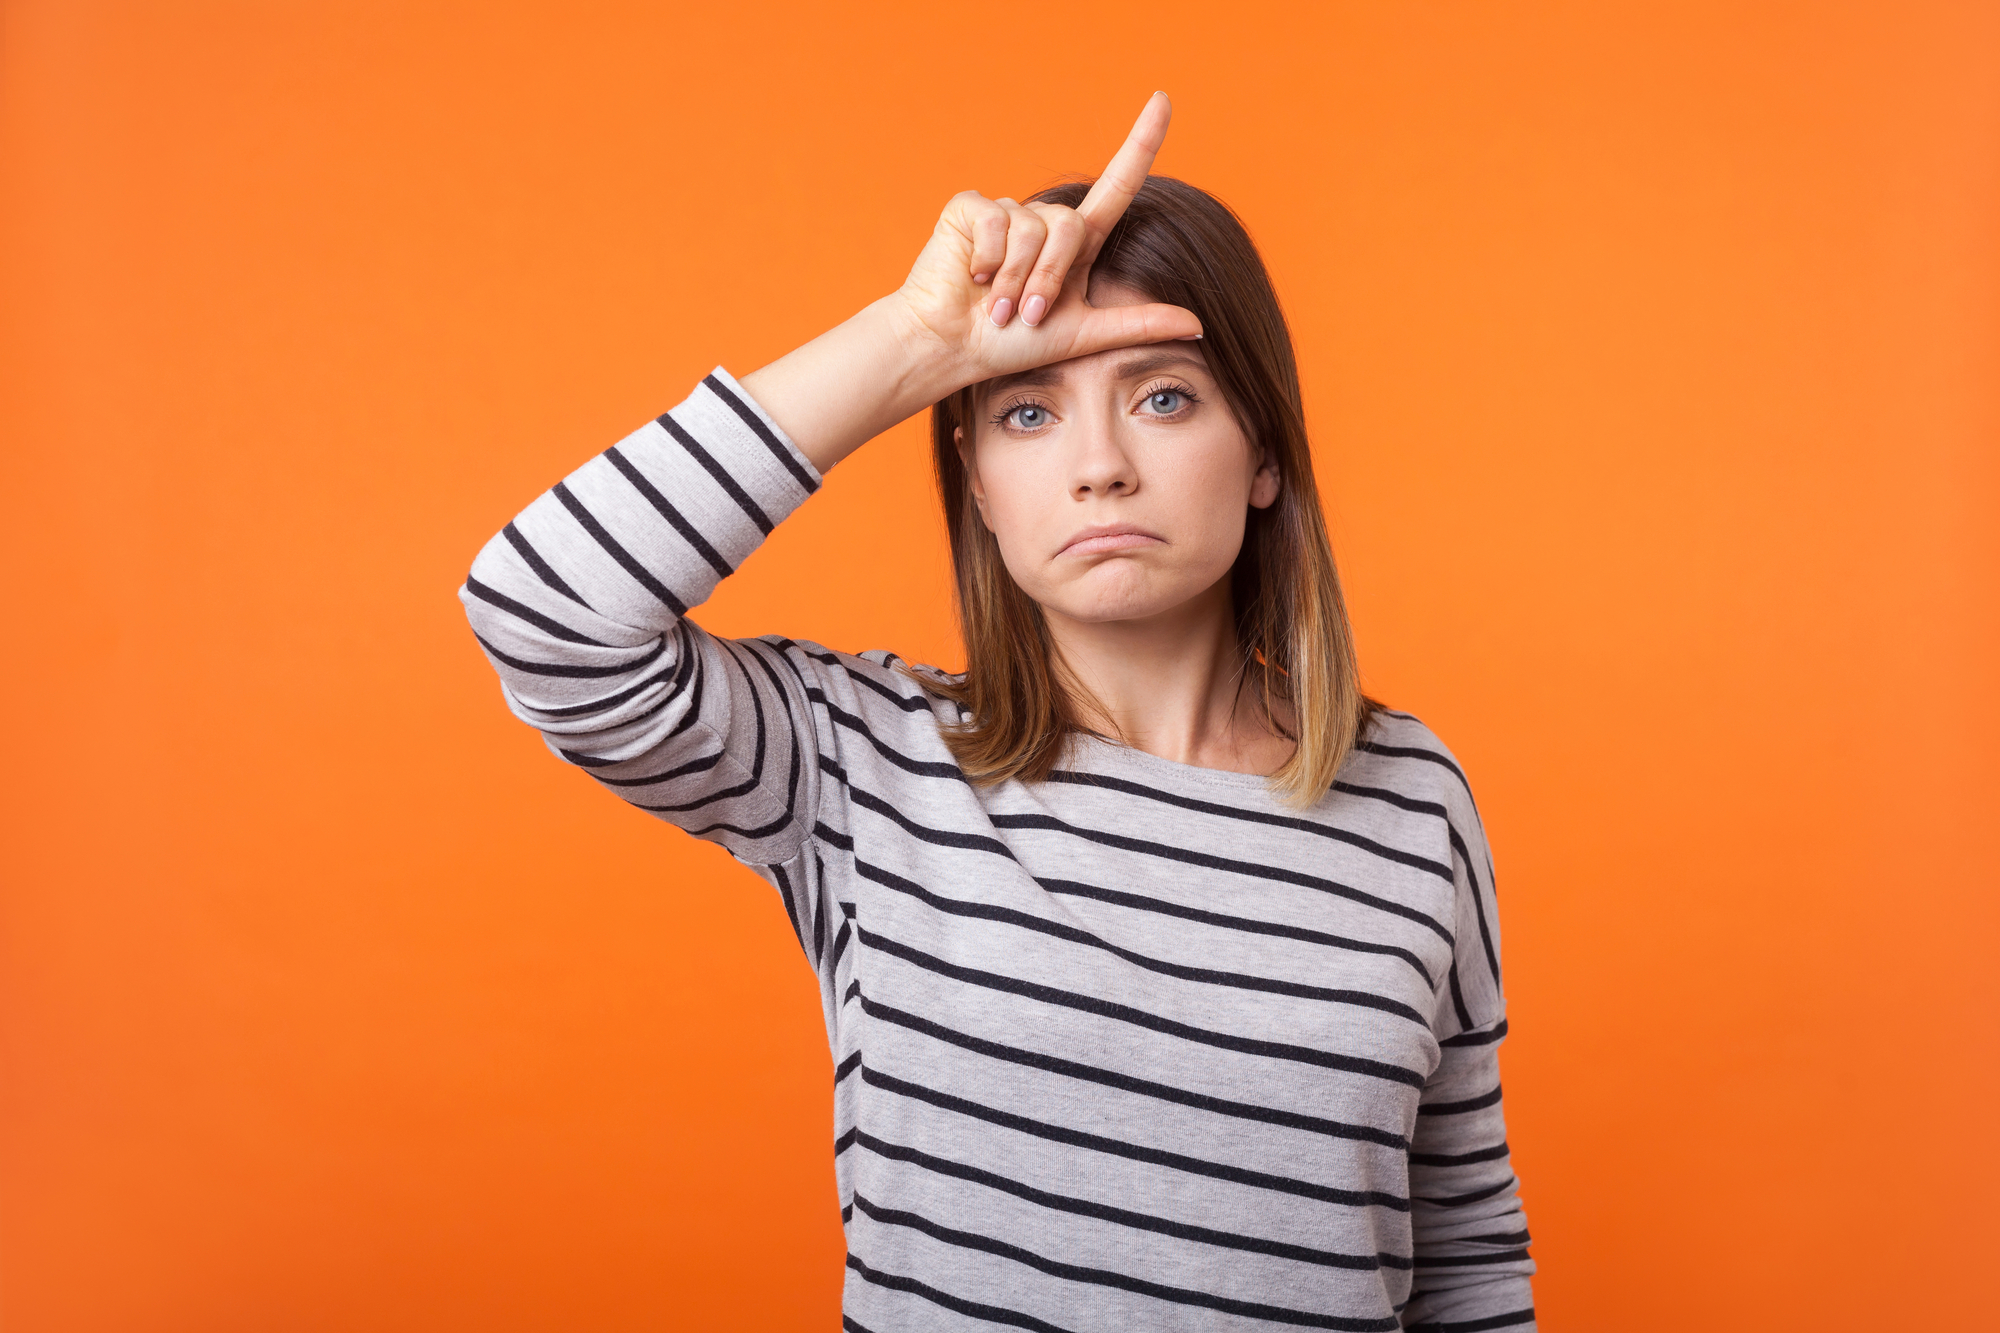 A woman with shoulder-length hair wearing a black and white striped shirt is standing against an orange background. She has her right hand raised to her forehead, forming an "L" shape with her fingers, and is making a disappointed or disapproving expression.